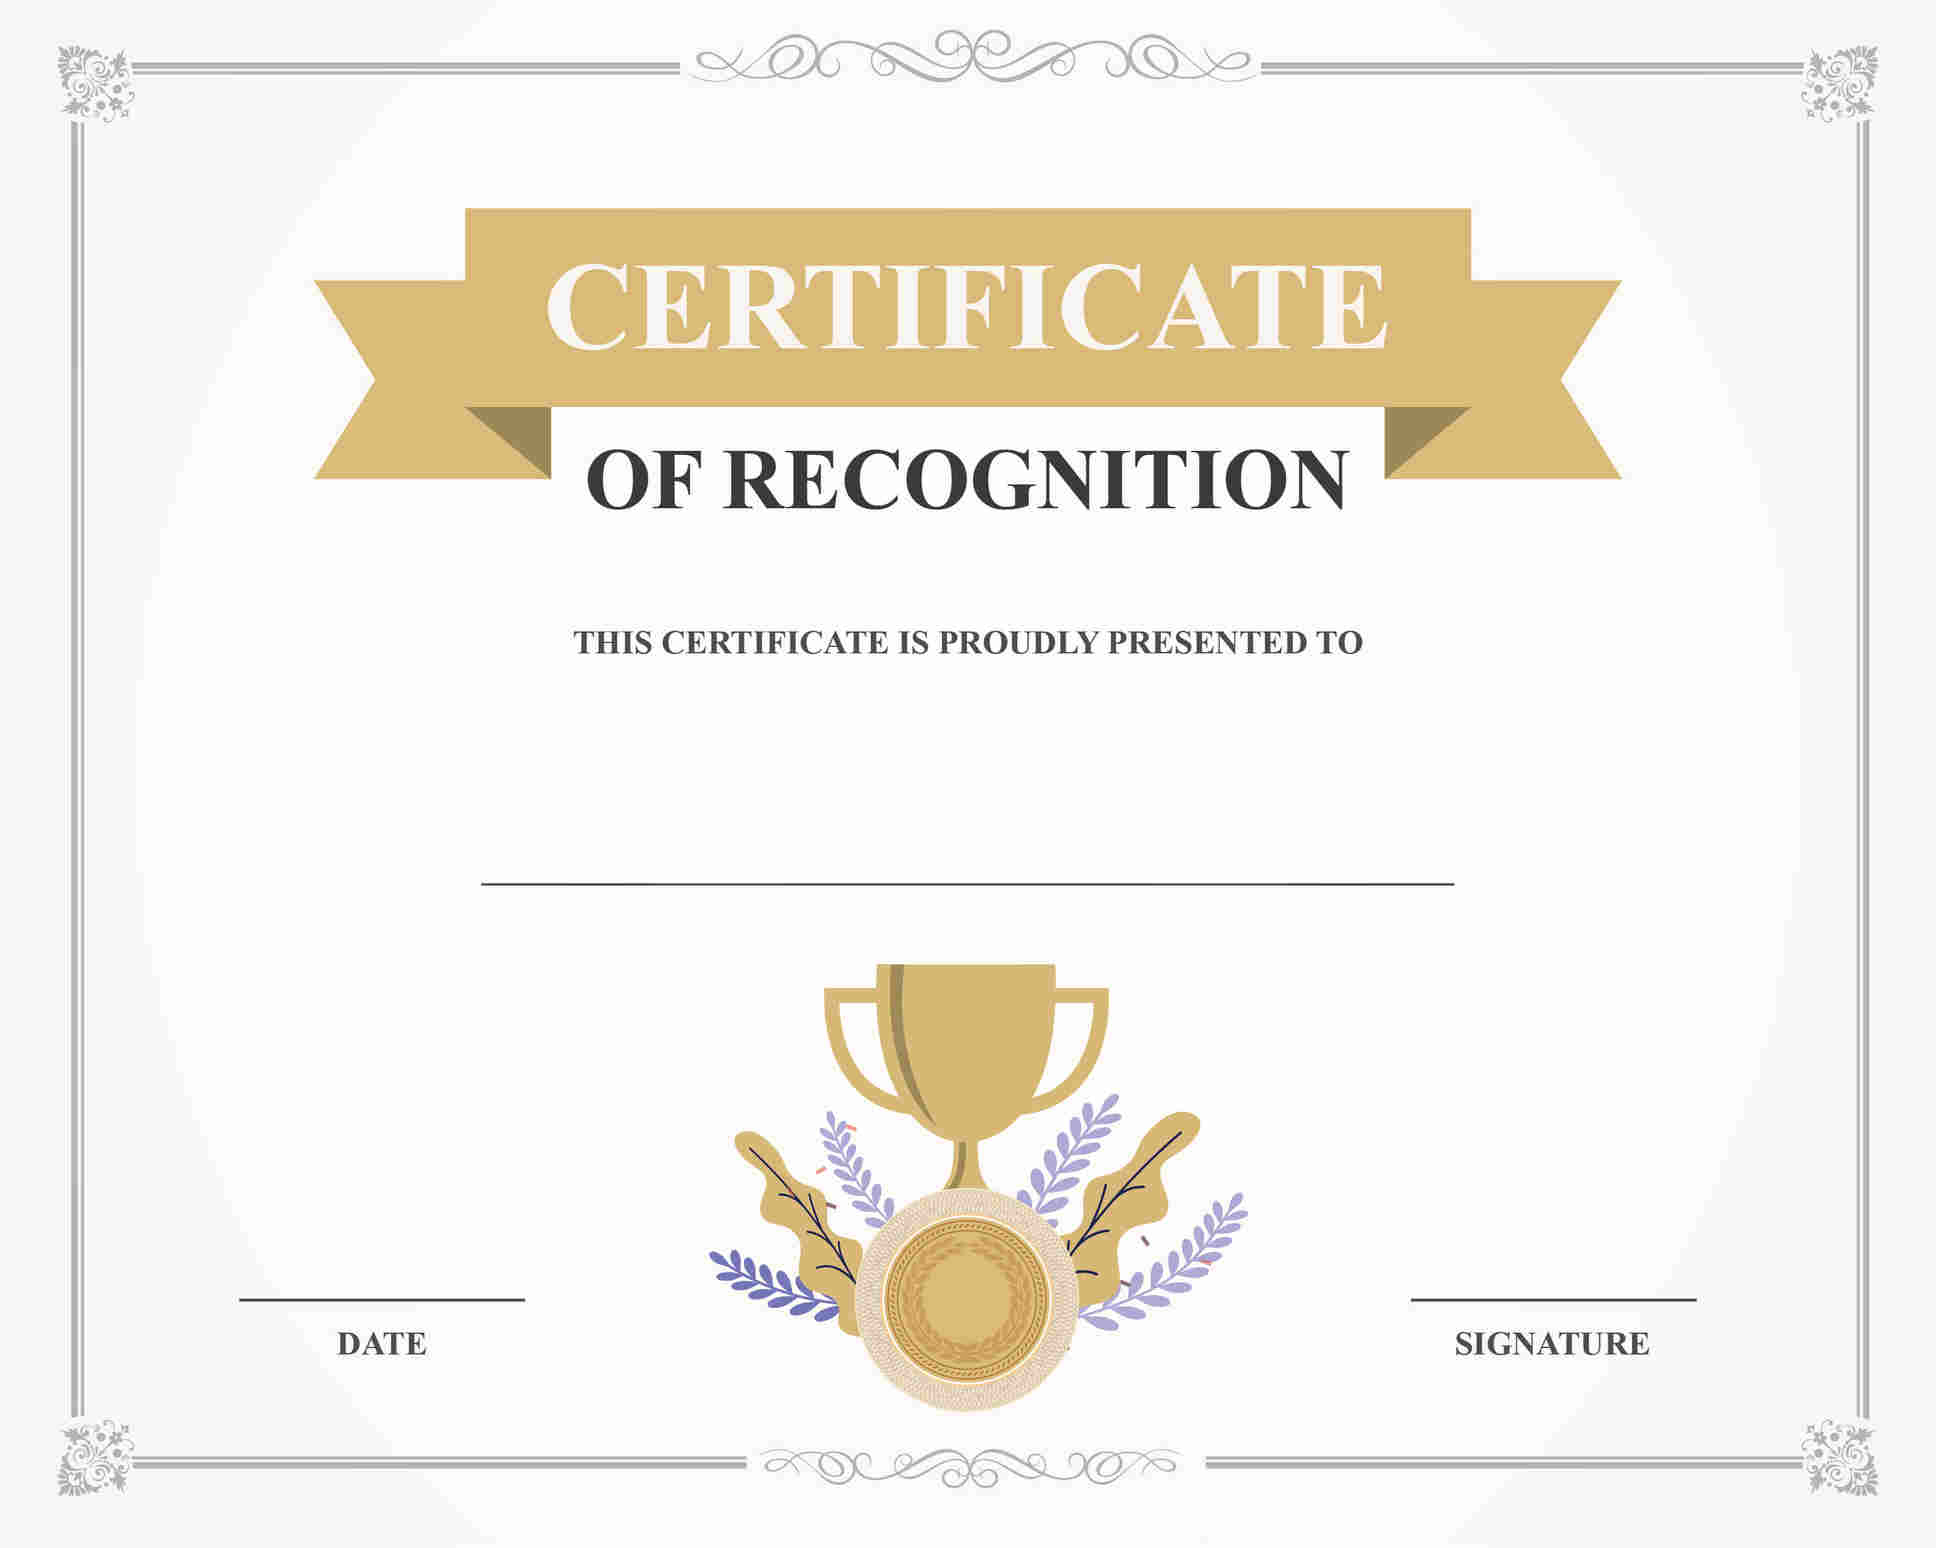 10 Amazing Award Certificate Templates in 10 - Recognize With Promotion Certificate Template